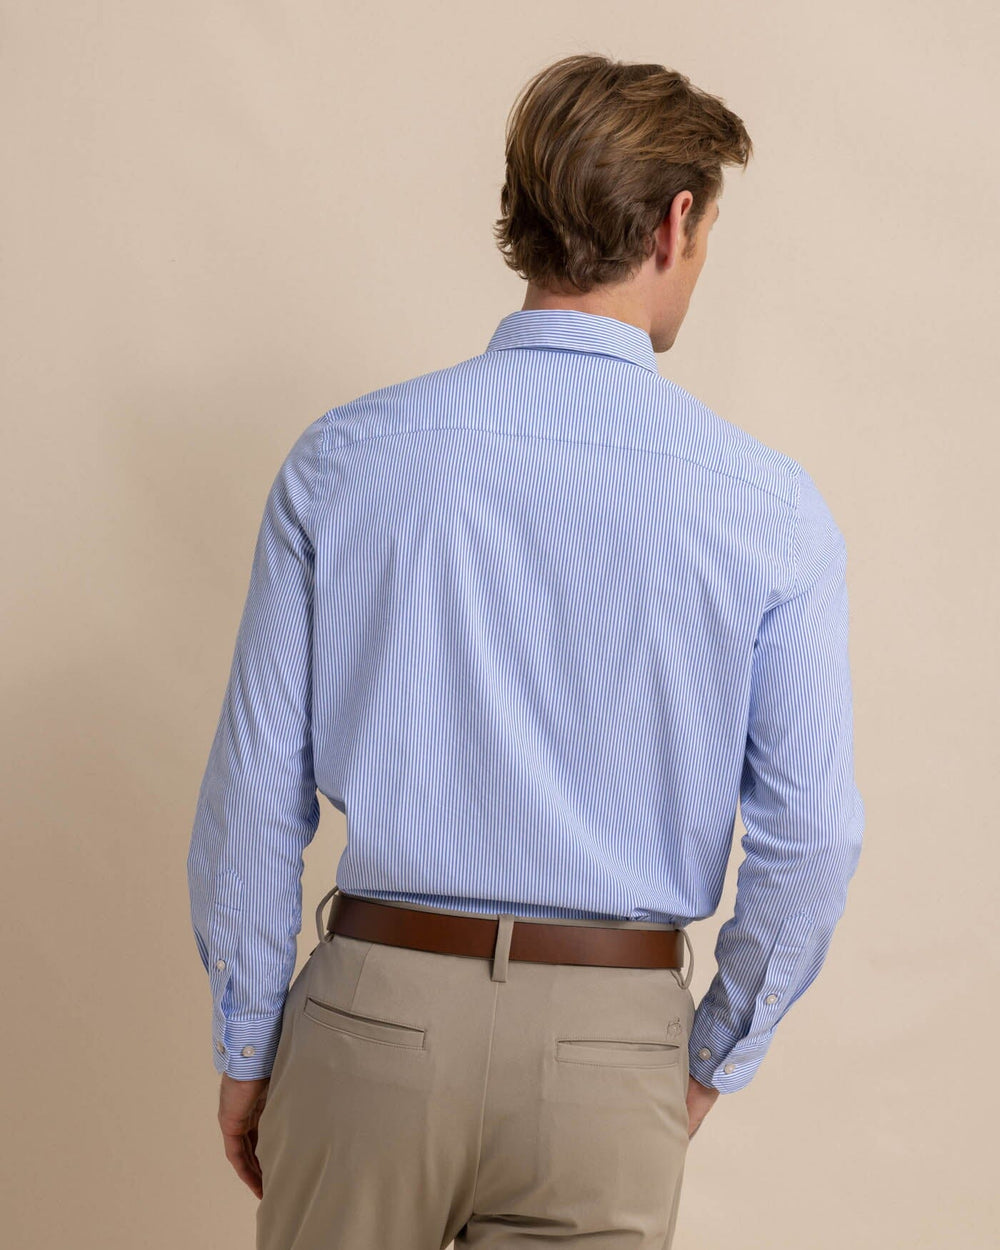 The back view of the Southern Tide Charleston Granby Stripe Long Sleeve Sport Shirt by Southern Tide - Cobalt Blue